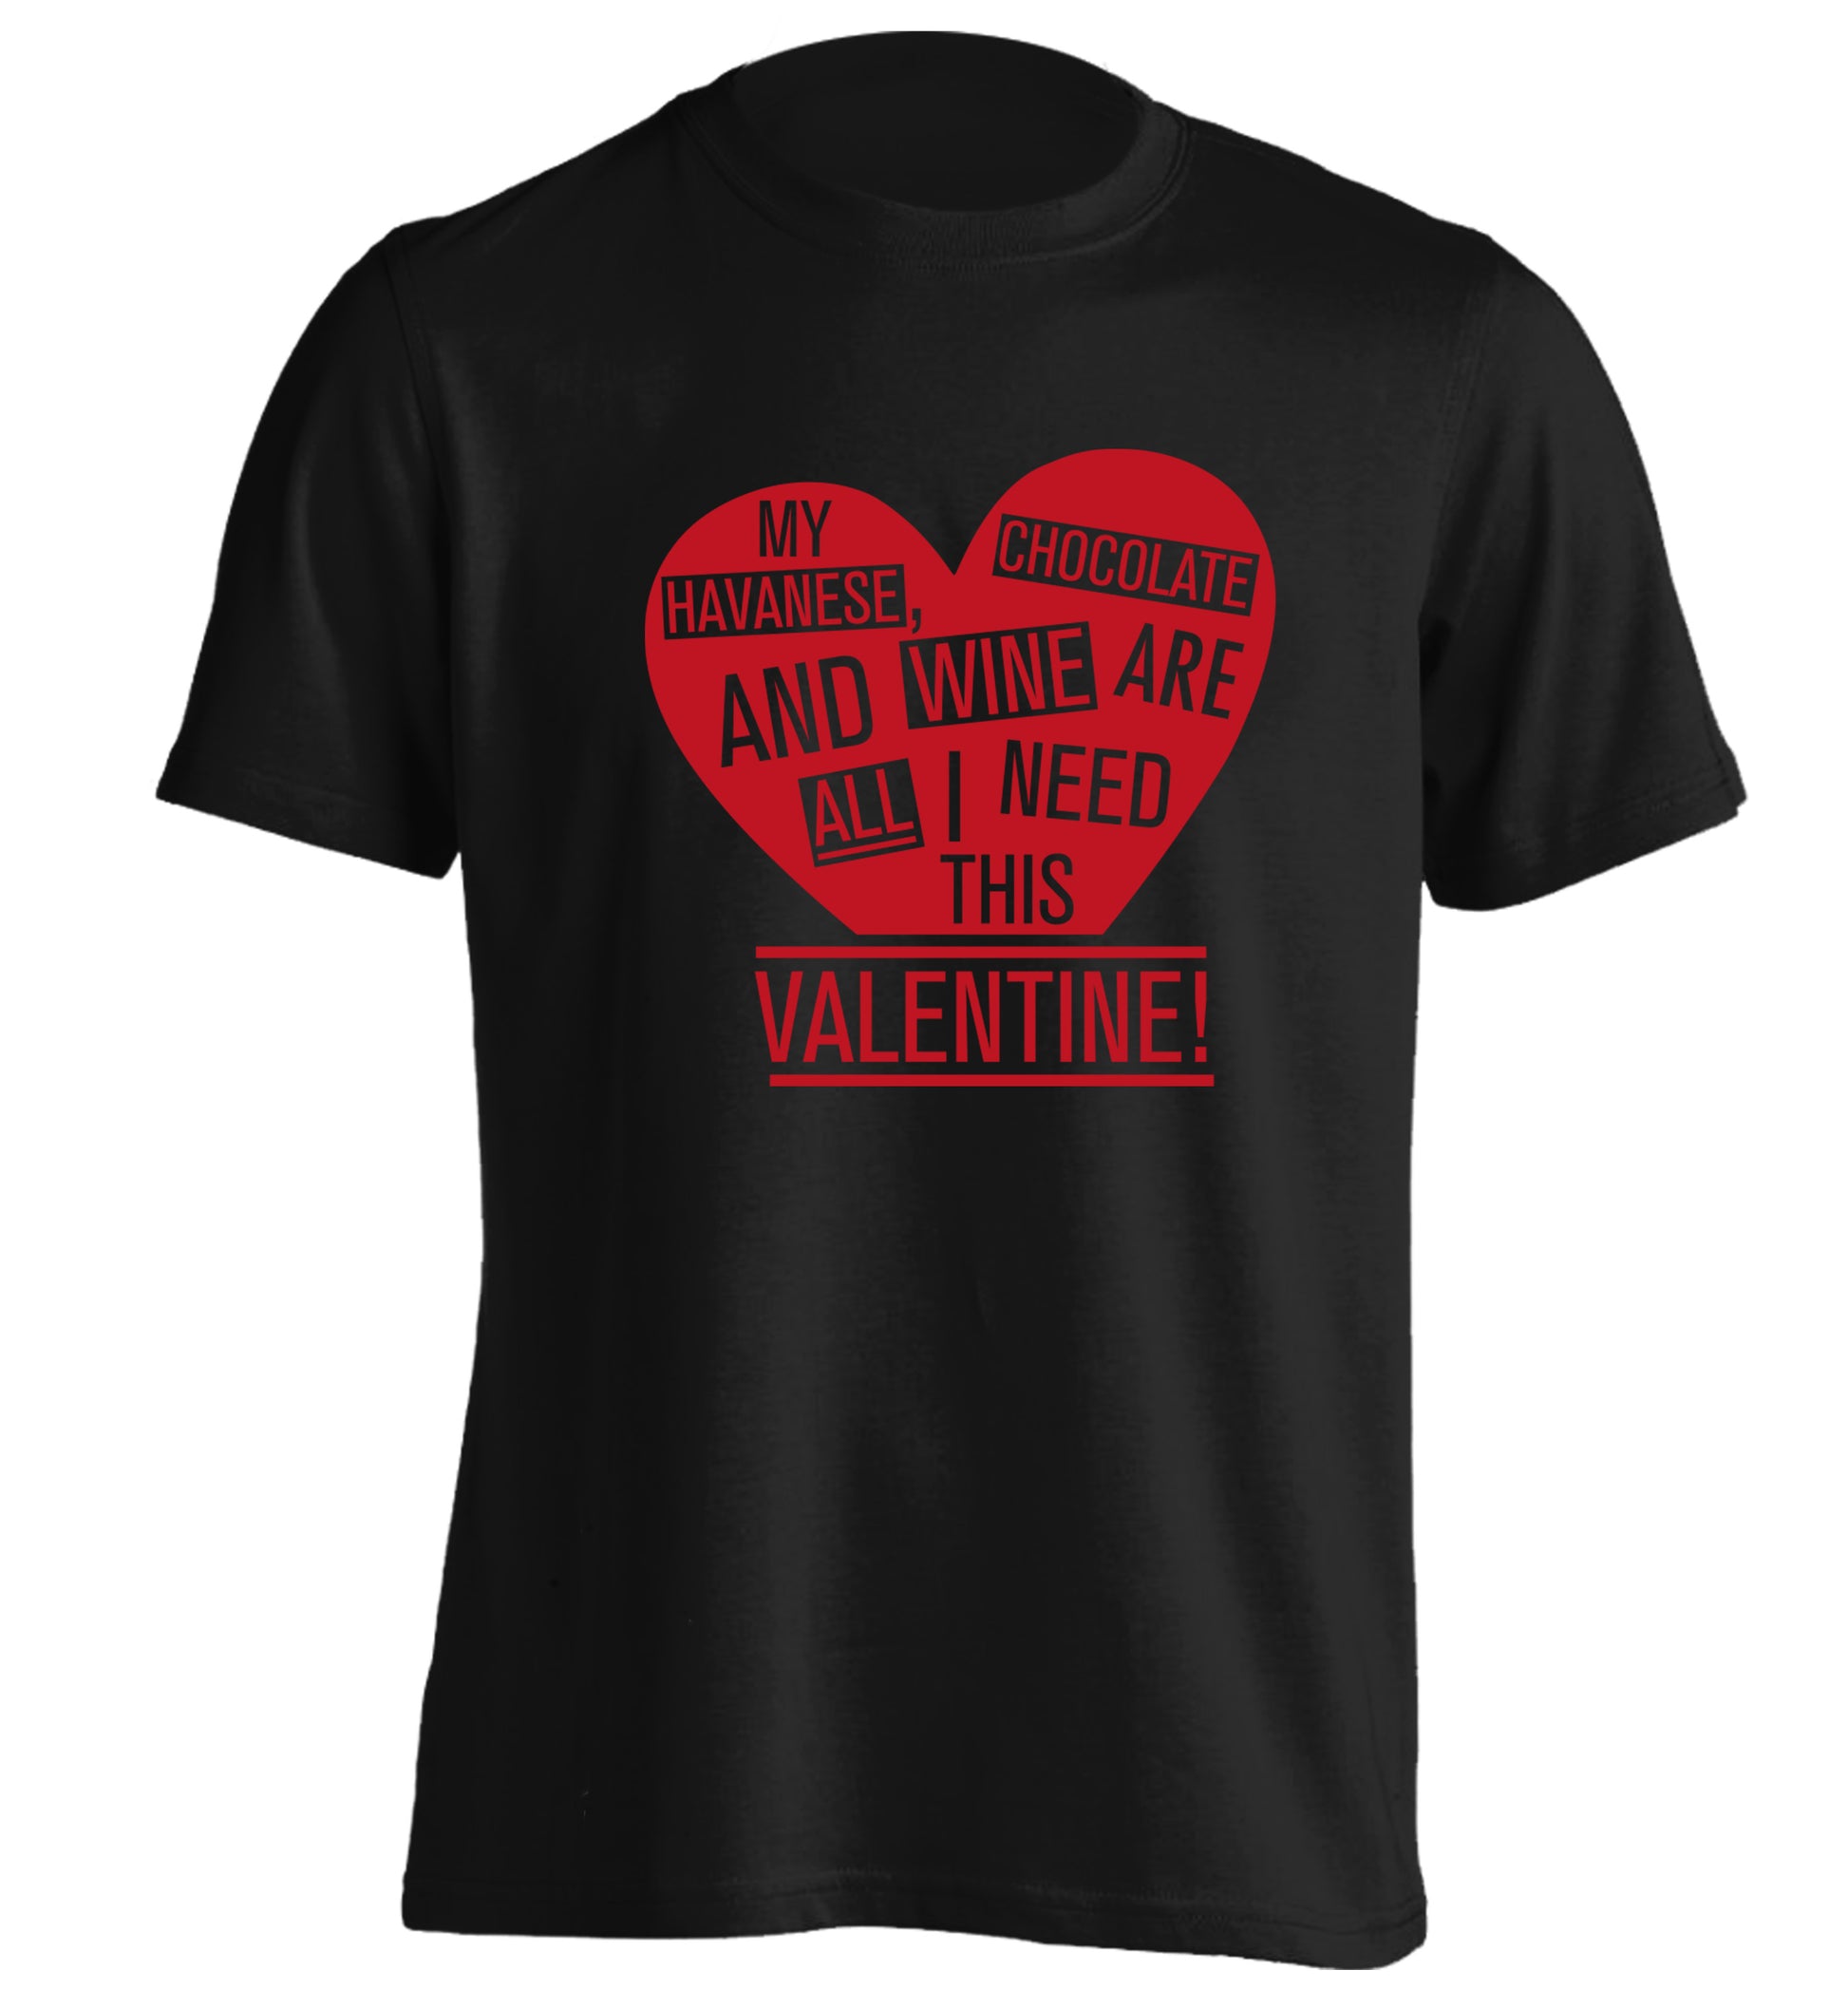 My havanese, chocolate and wine are all I need this valentine! adults unisex black Tshirt 2XL